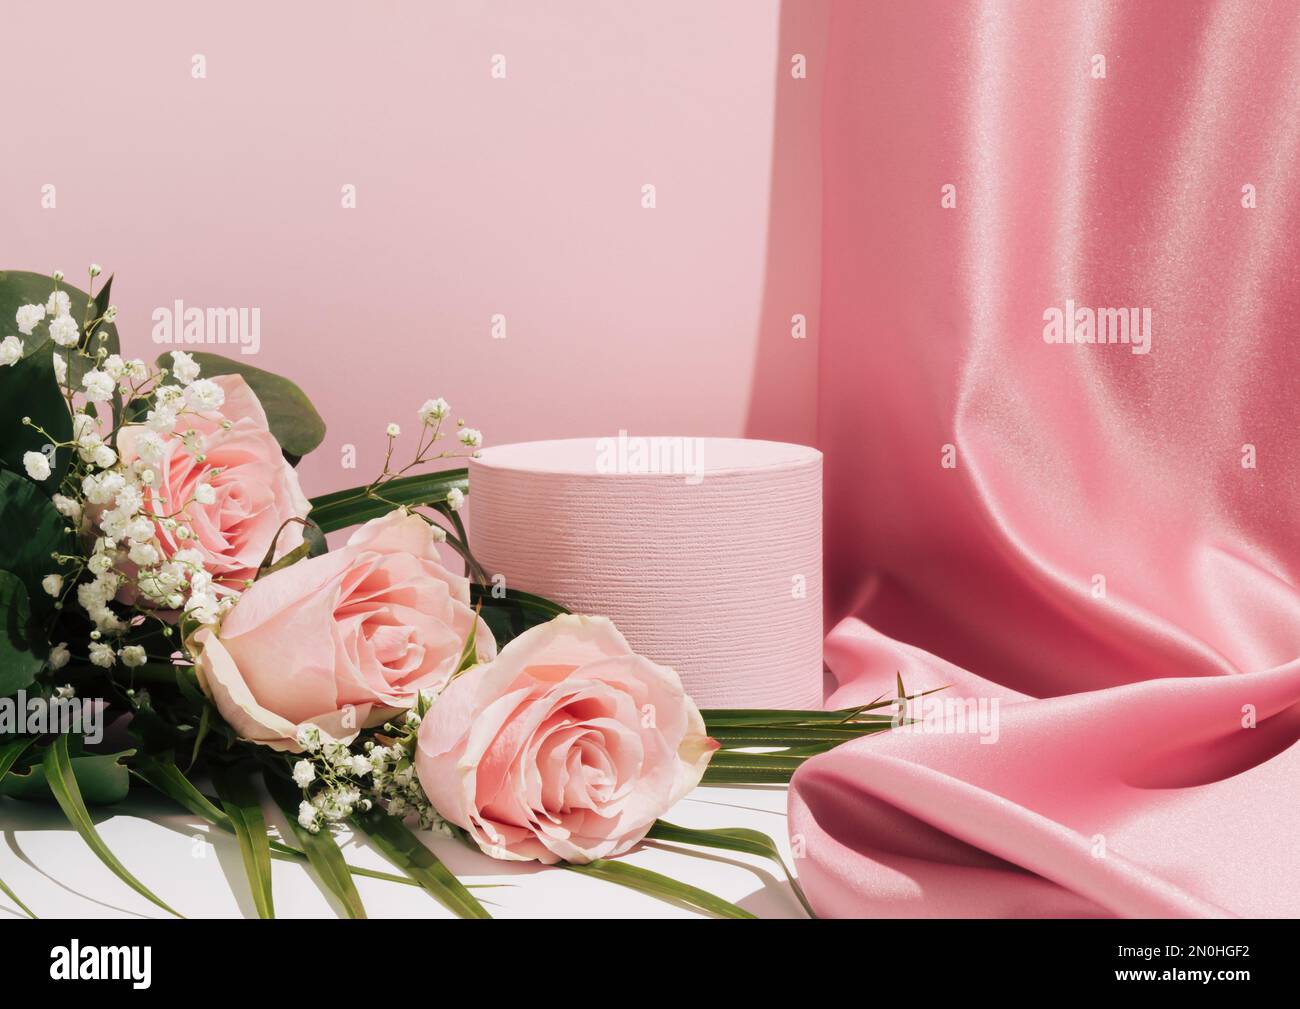 https://c8.alamy.com/comp/2N0HGF2/romantic-pastel-pink-composition-satin-curtain-and-bouquet-of-pink-roses-suitable-for-product-display-and-business-concept-modern-aesthetic-2N0HGF2.jpg